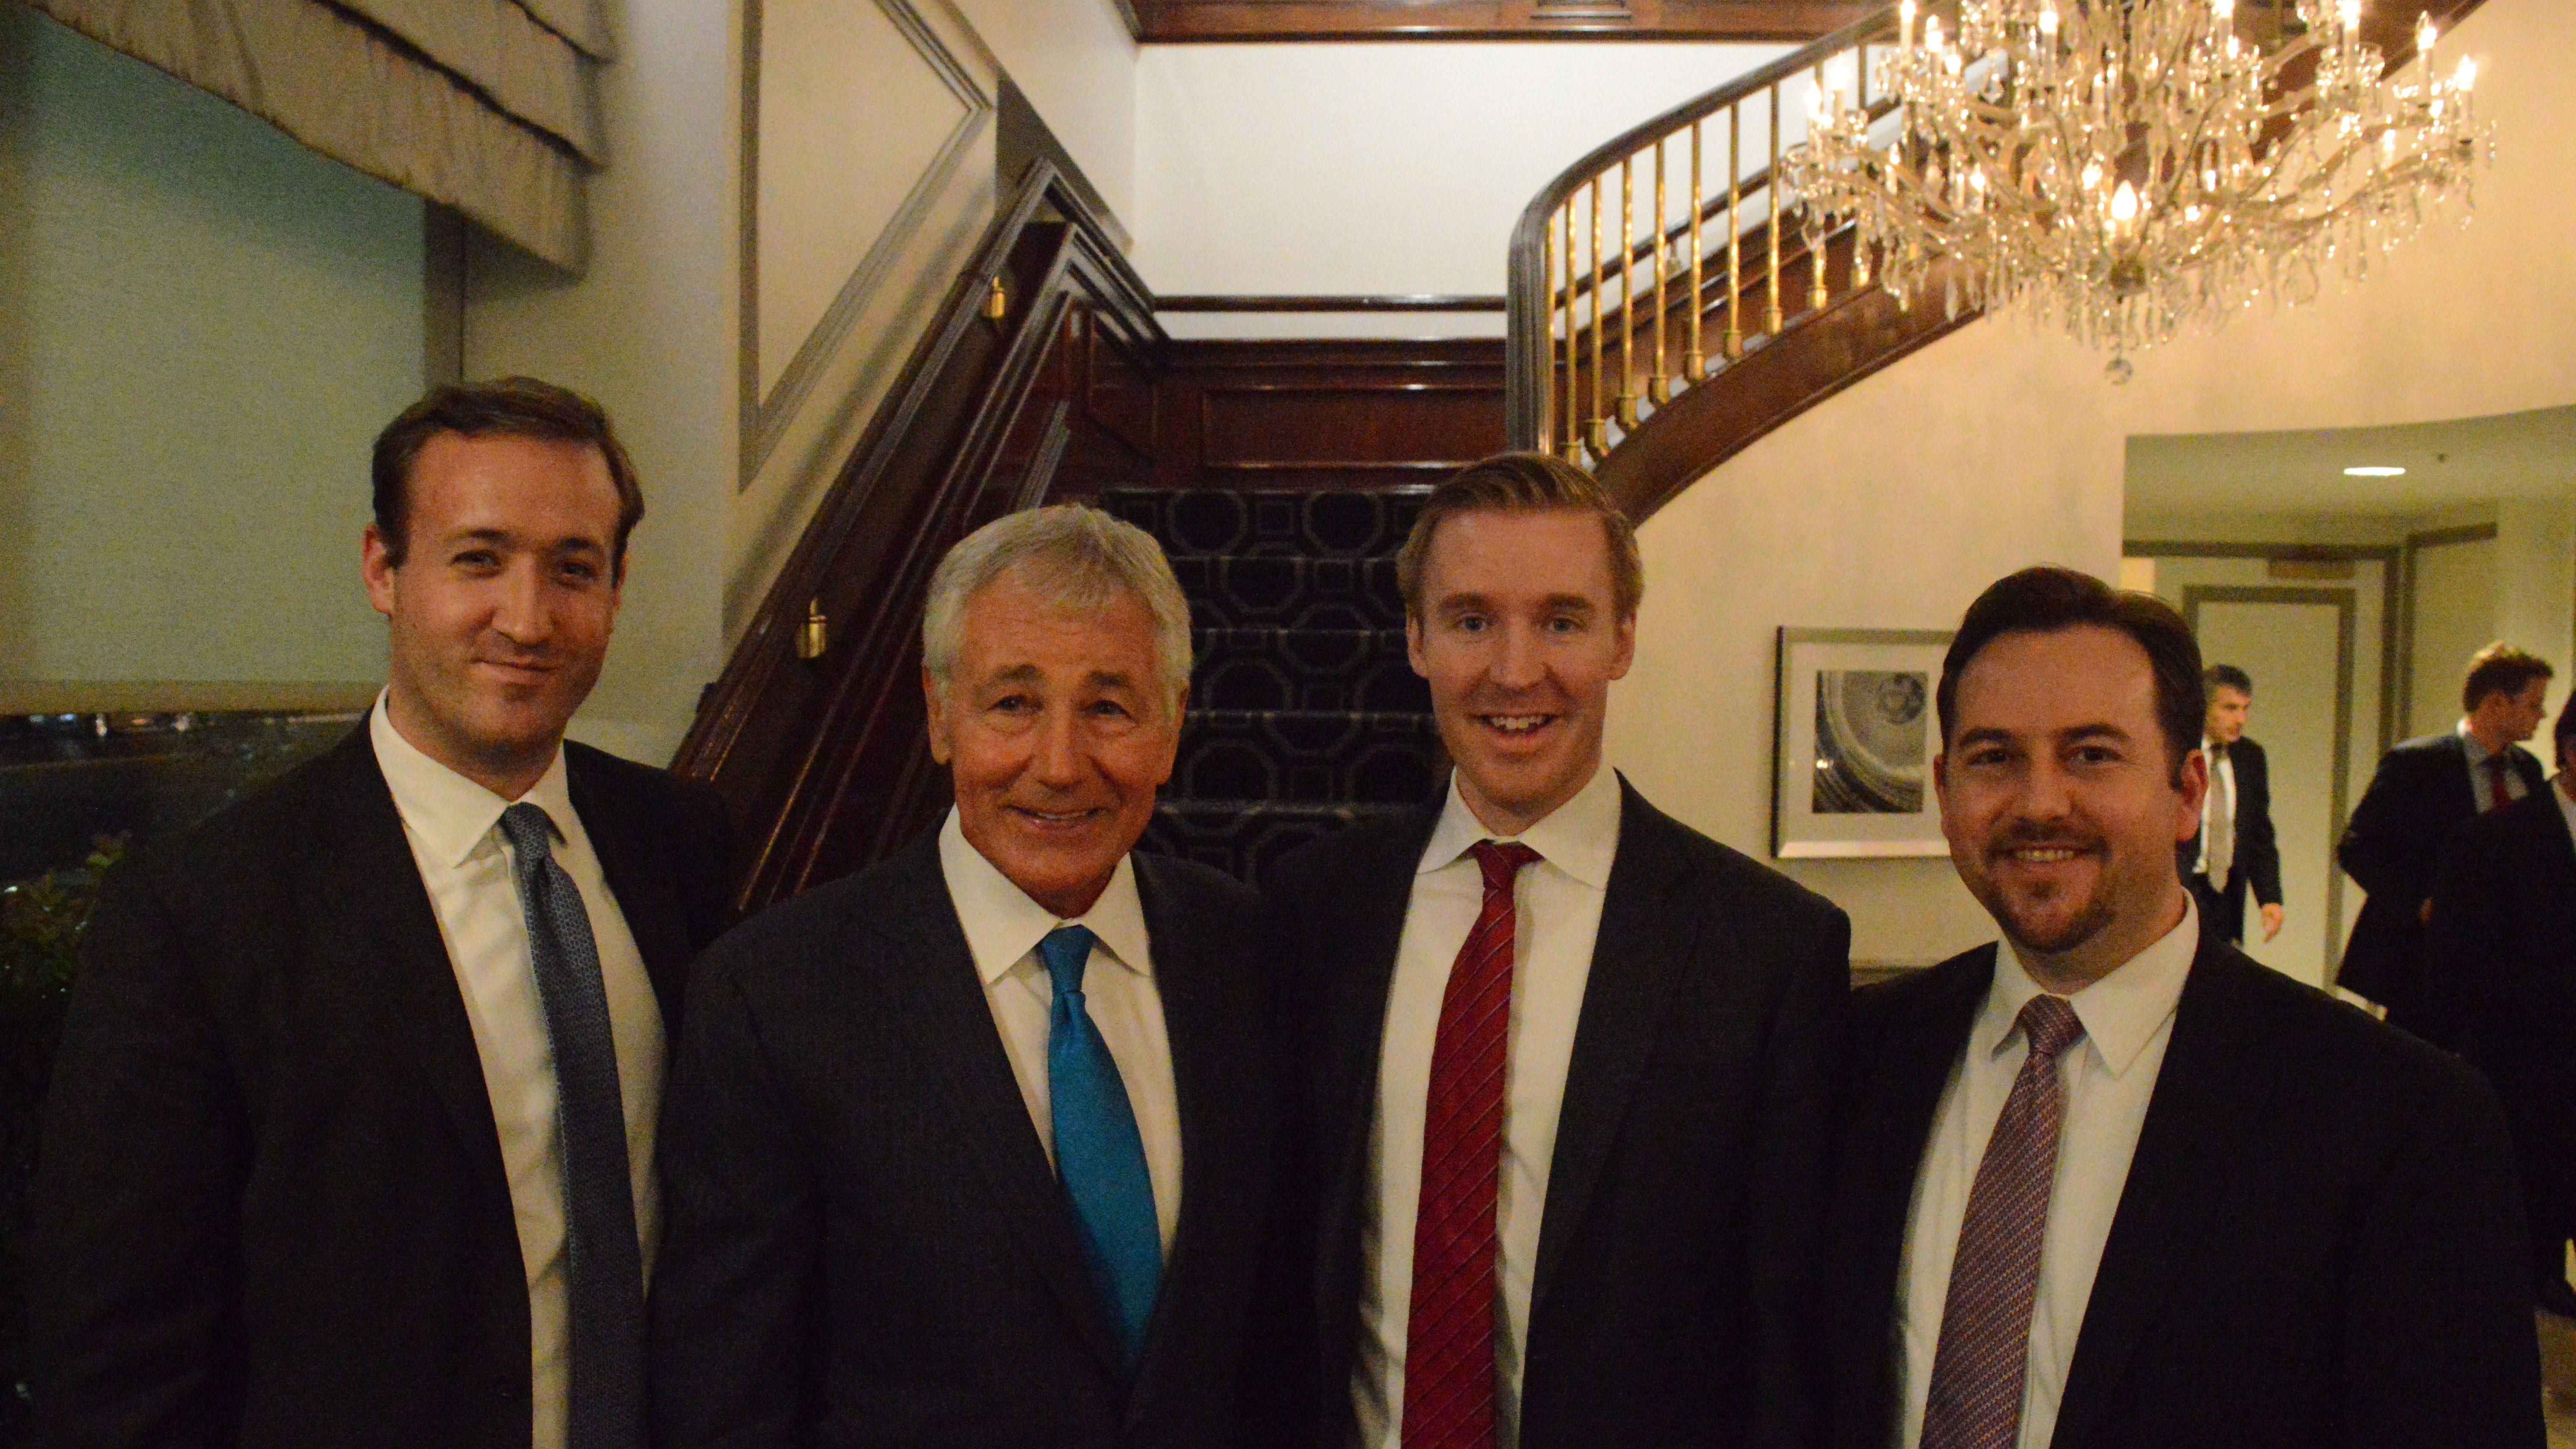 WBD Sponsors Chuck Hagel Discussion Hosted by Partnership for a Secure America